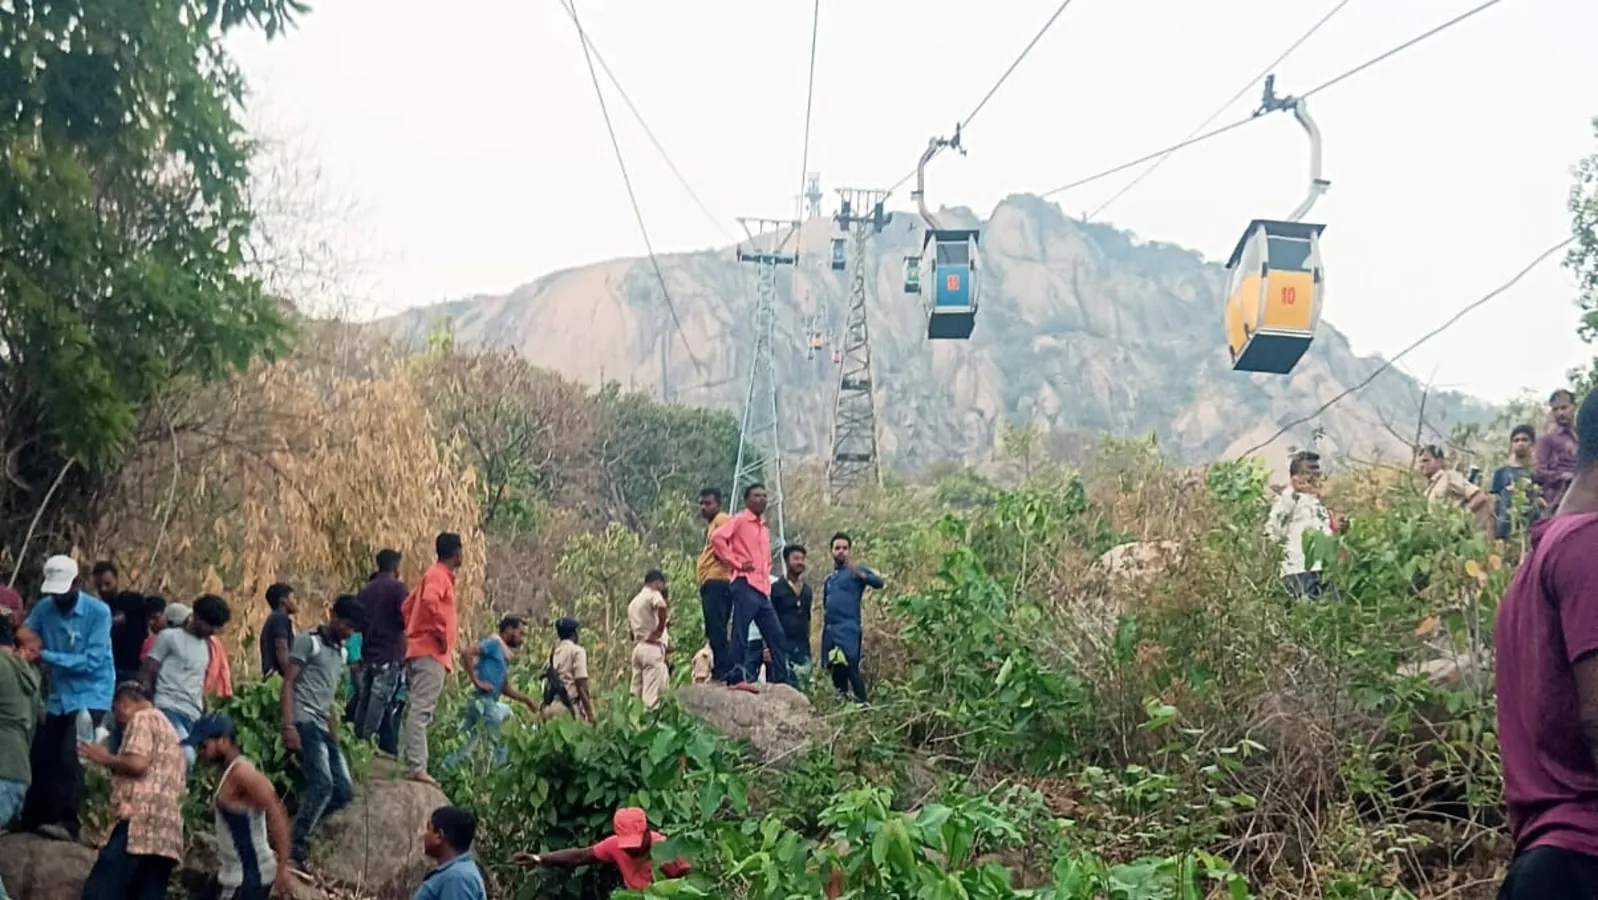 Jharkhand ropeway mishap: One dead, operation on to rescue dozens